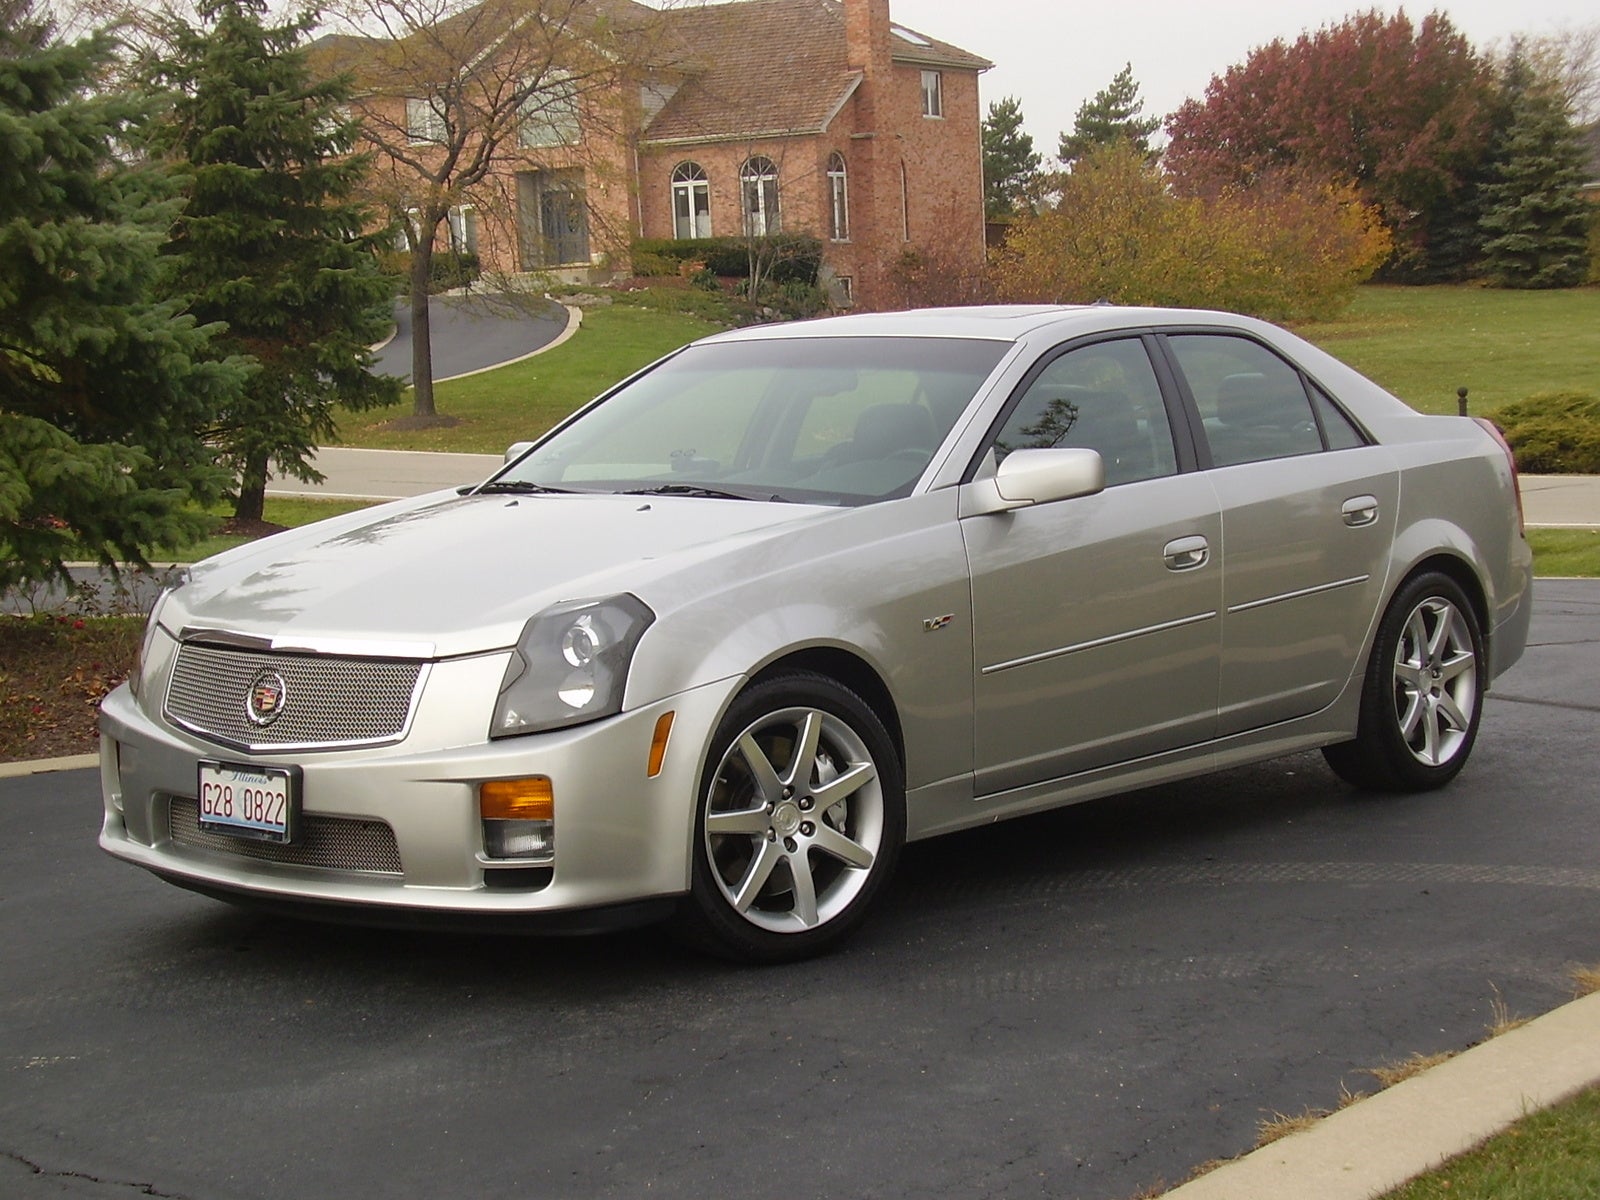 Cadillac  on 2004 Cadillac Cts V   Pictures   2004 Cadillac Cts V Picture